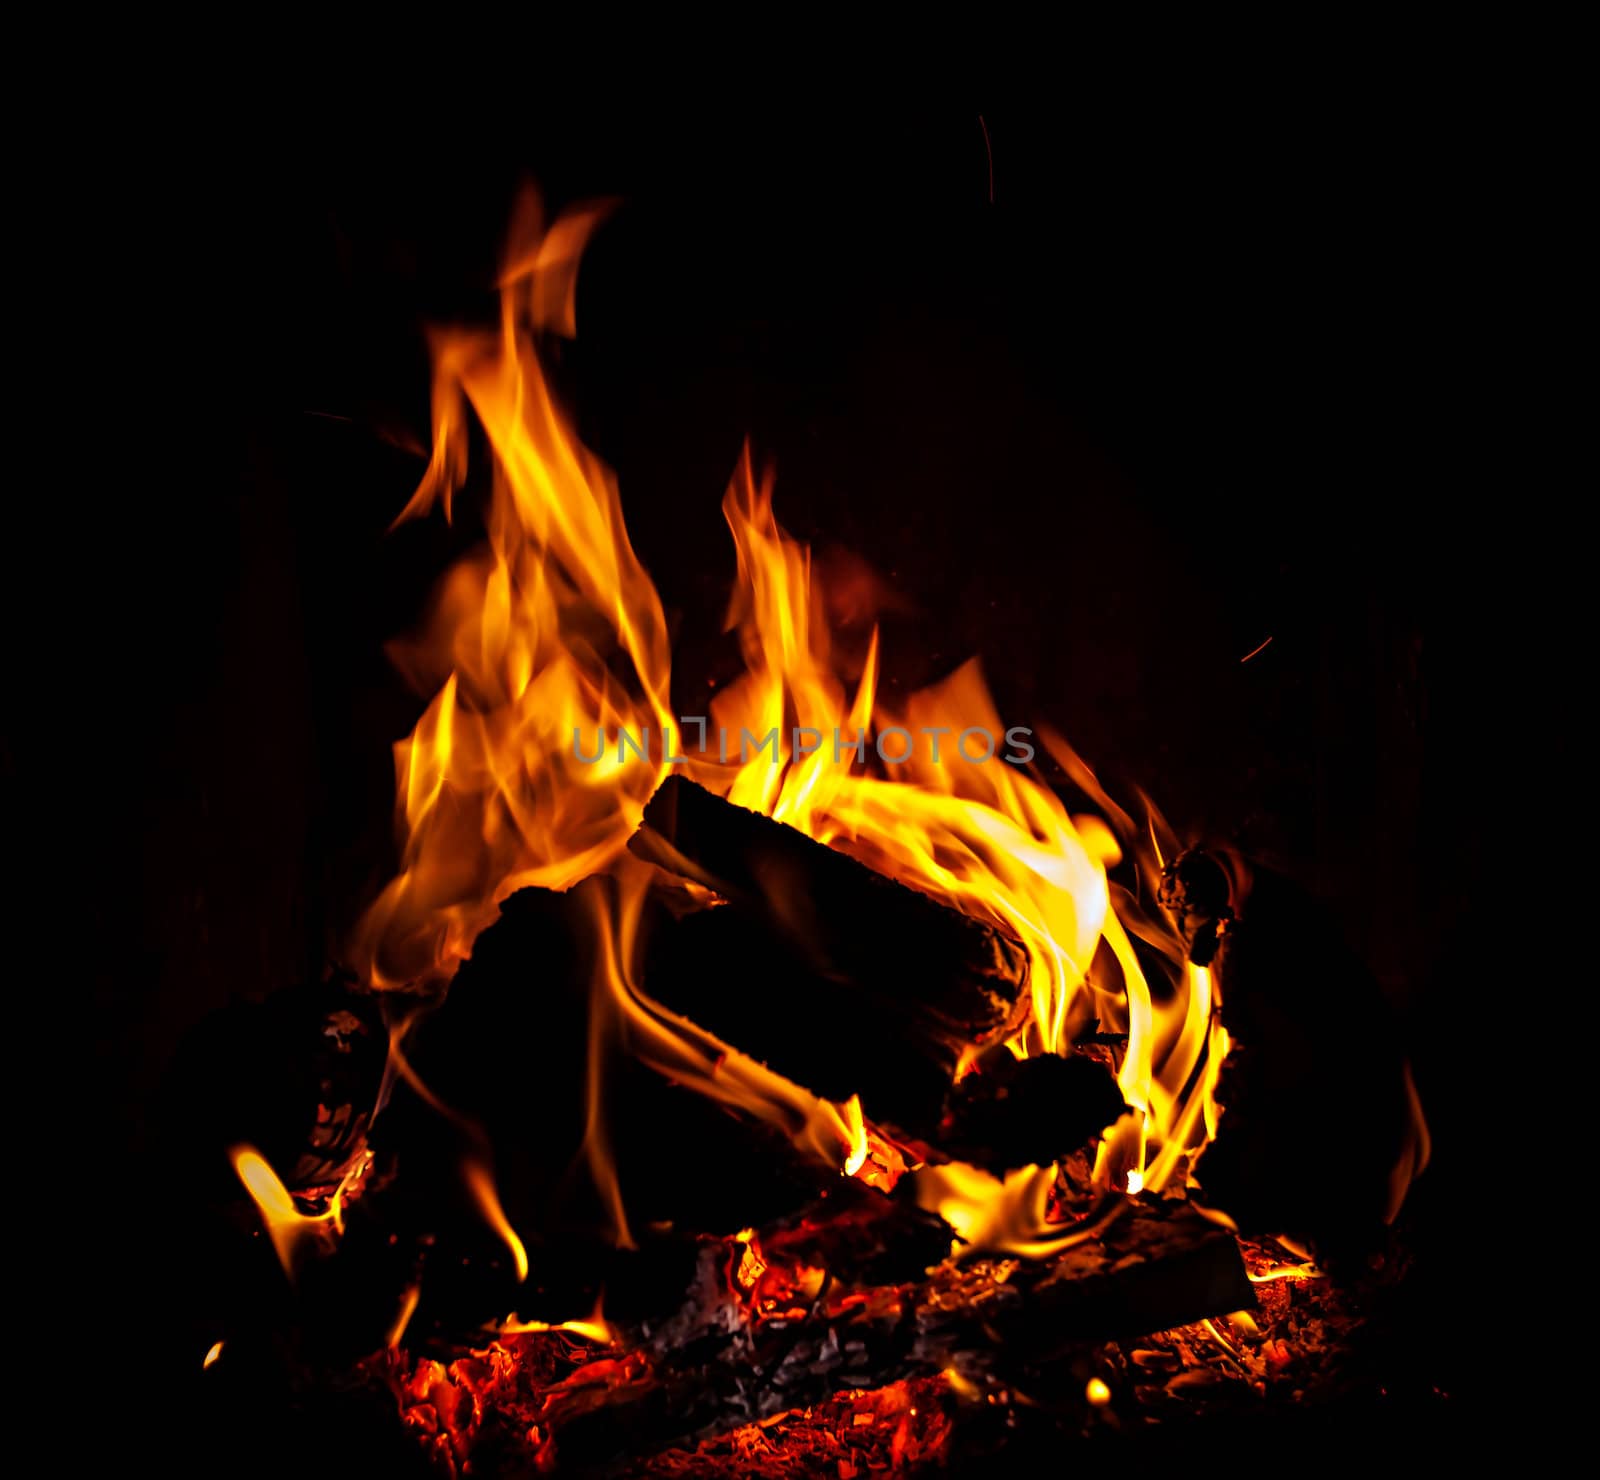 The fire in the furnace. Red flames on dark background